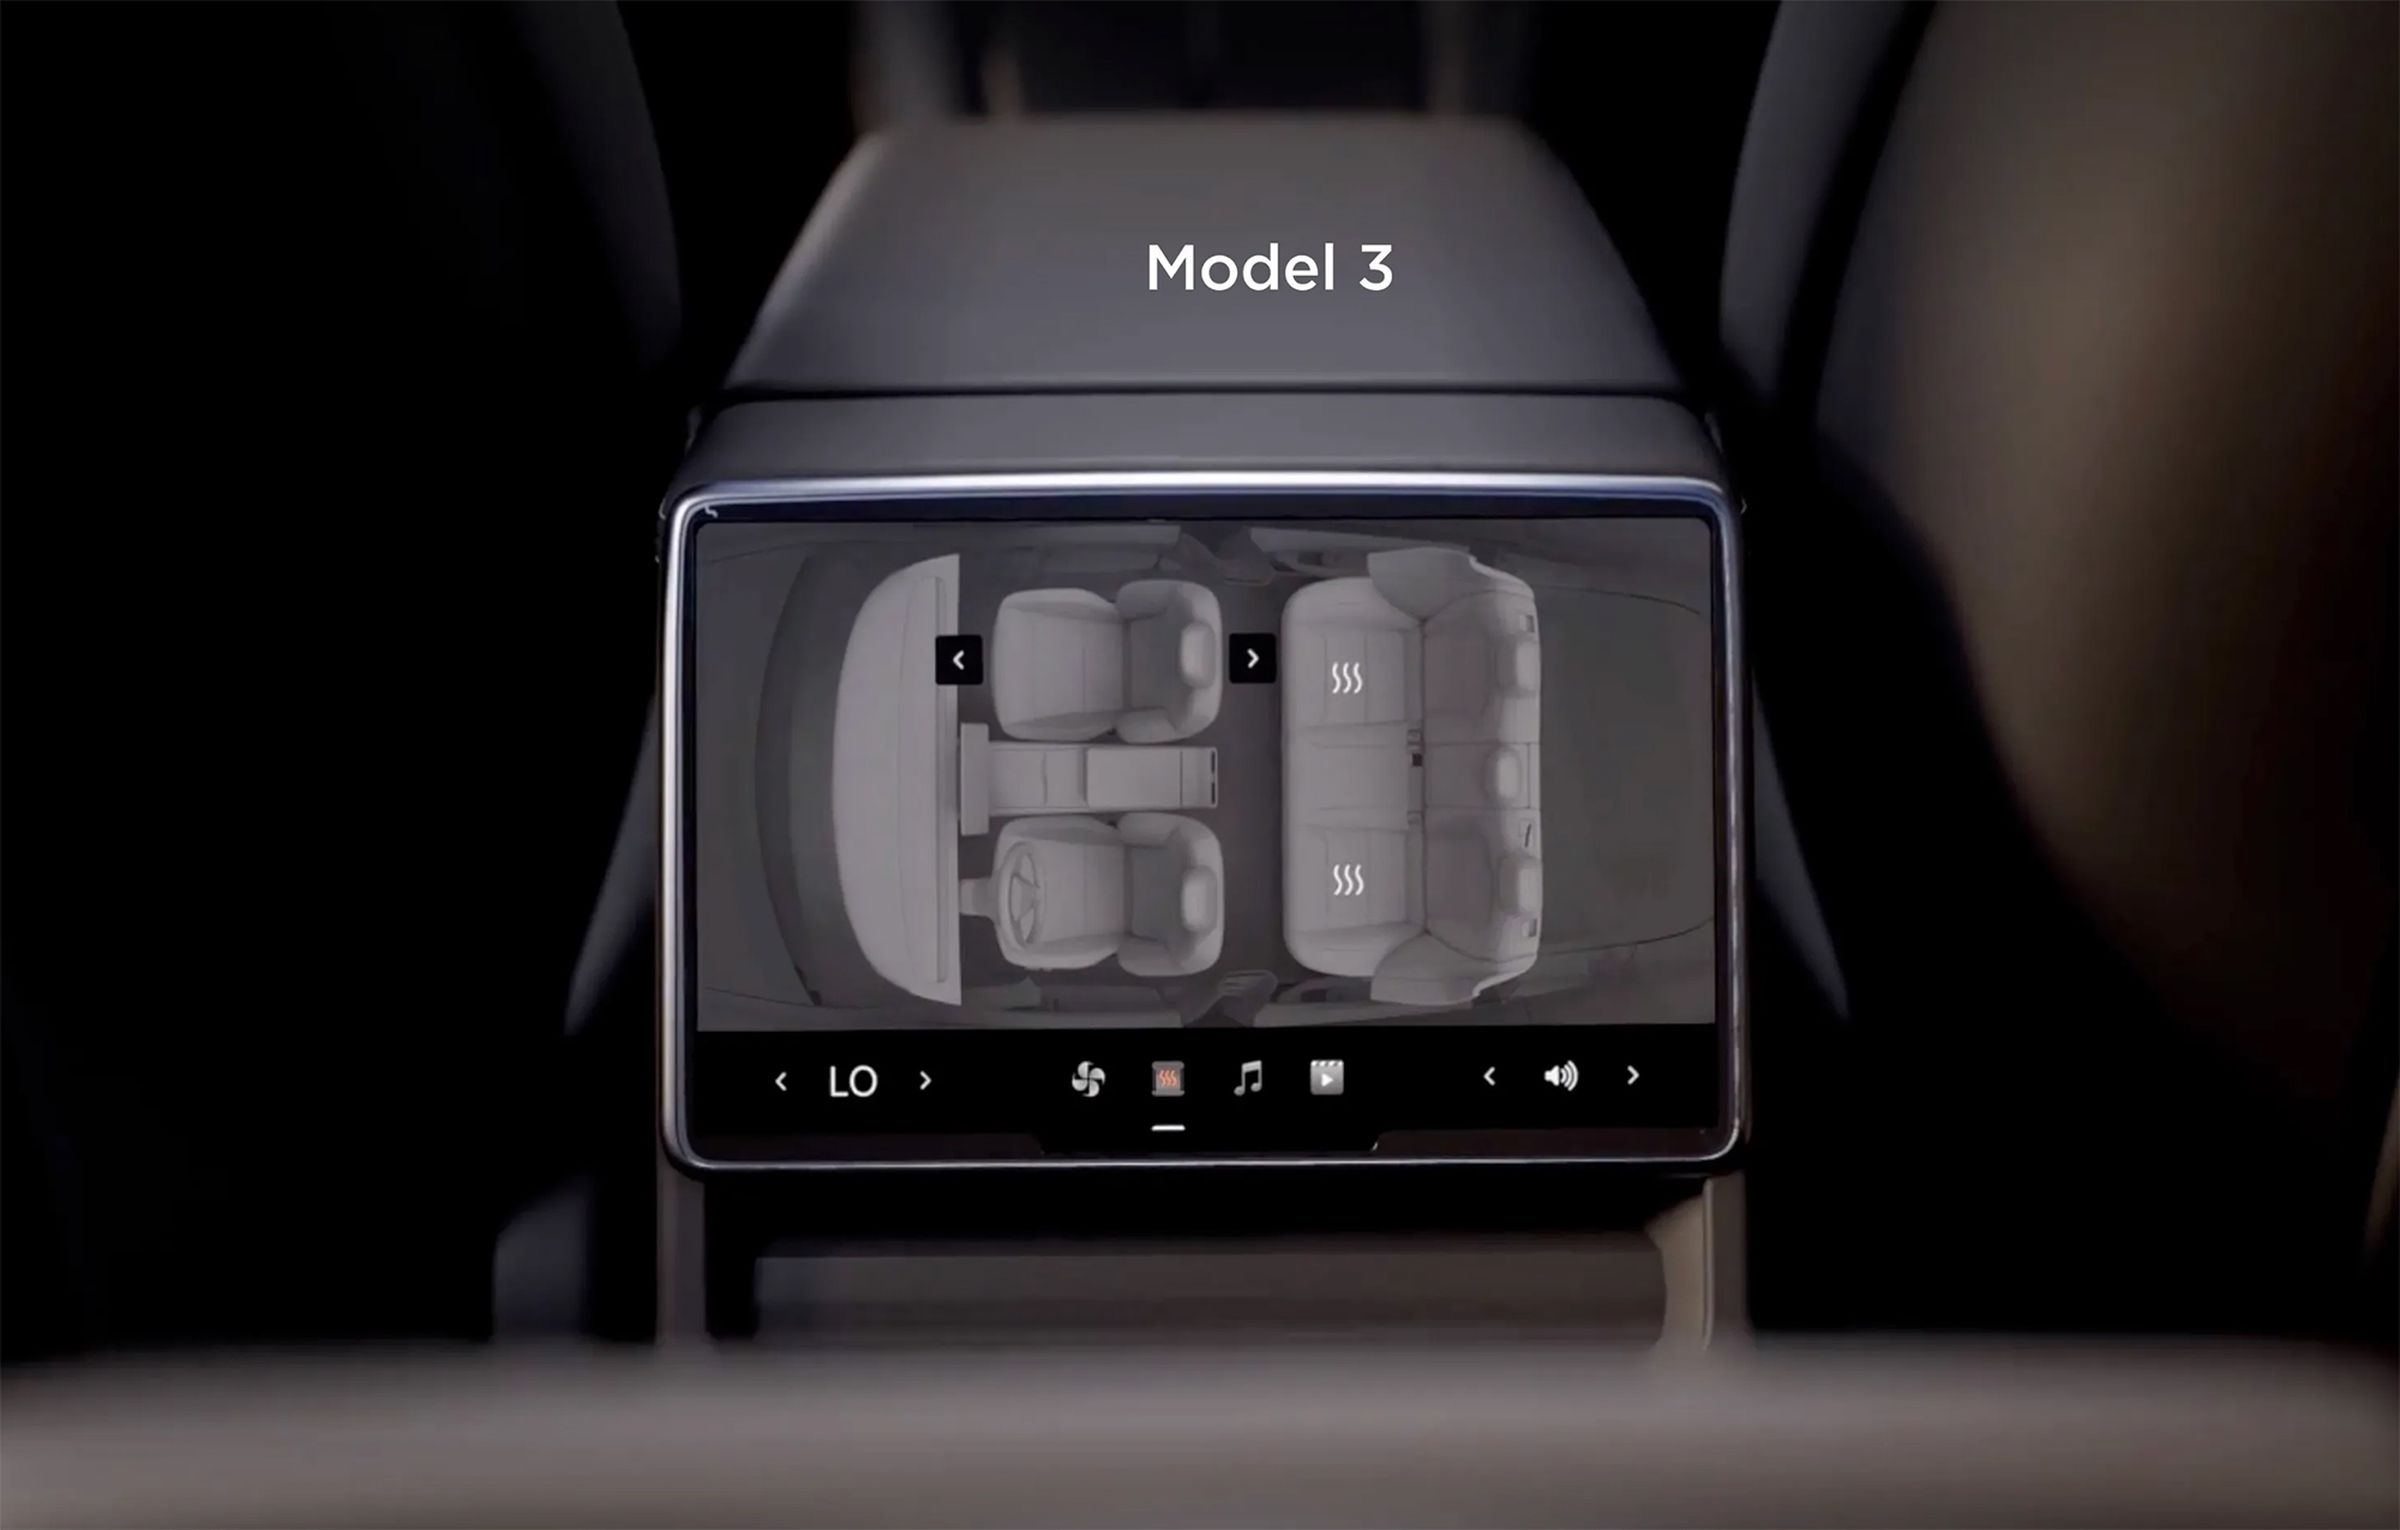 model 3 rear touchscreen showing seat heater activation buttons